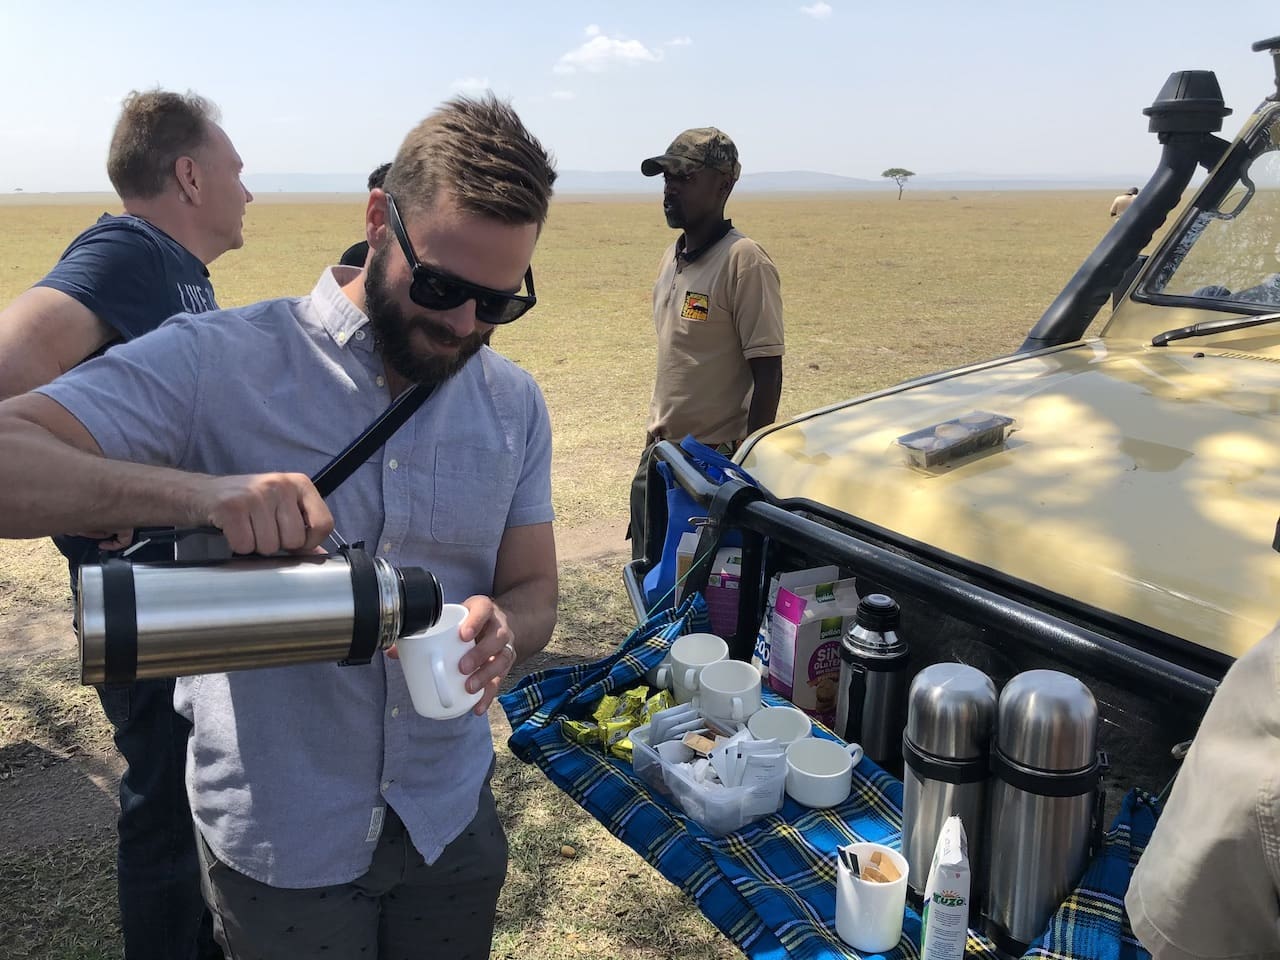 Robert Sharp, Founder of Out Adventures, pours coffee between game drives in Kenya.